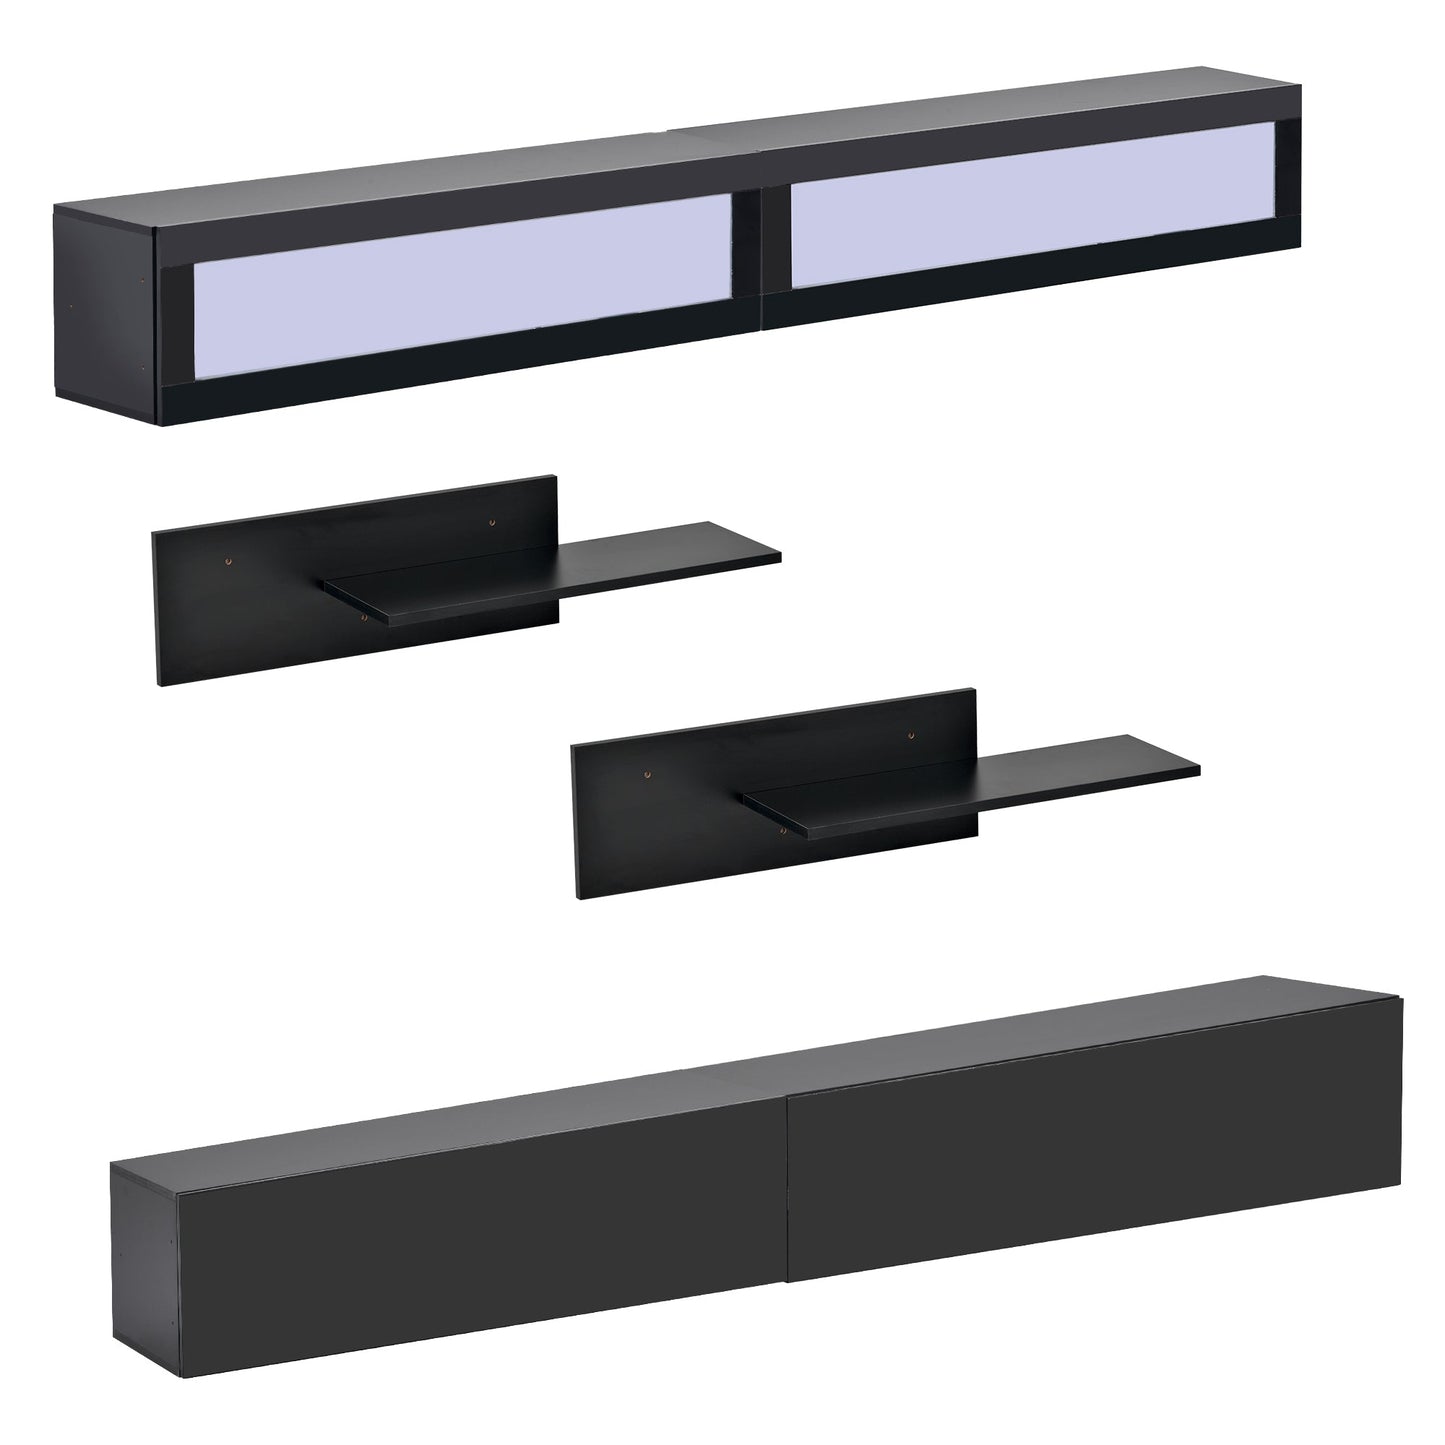 Trieste Black Wall Mount Floating High Gloss Entertainment Center for 95+ Inch TV 16-color RGB LED Lights